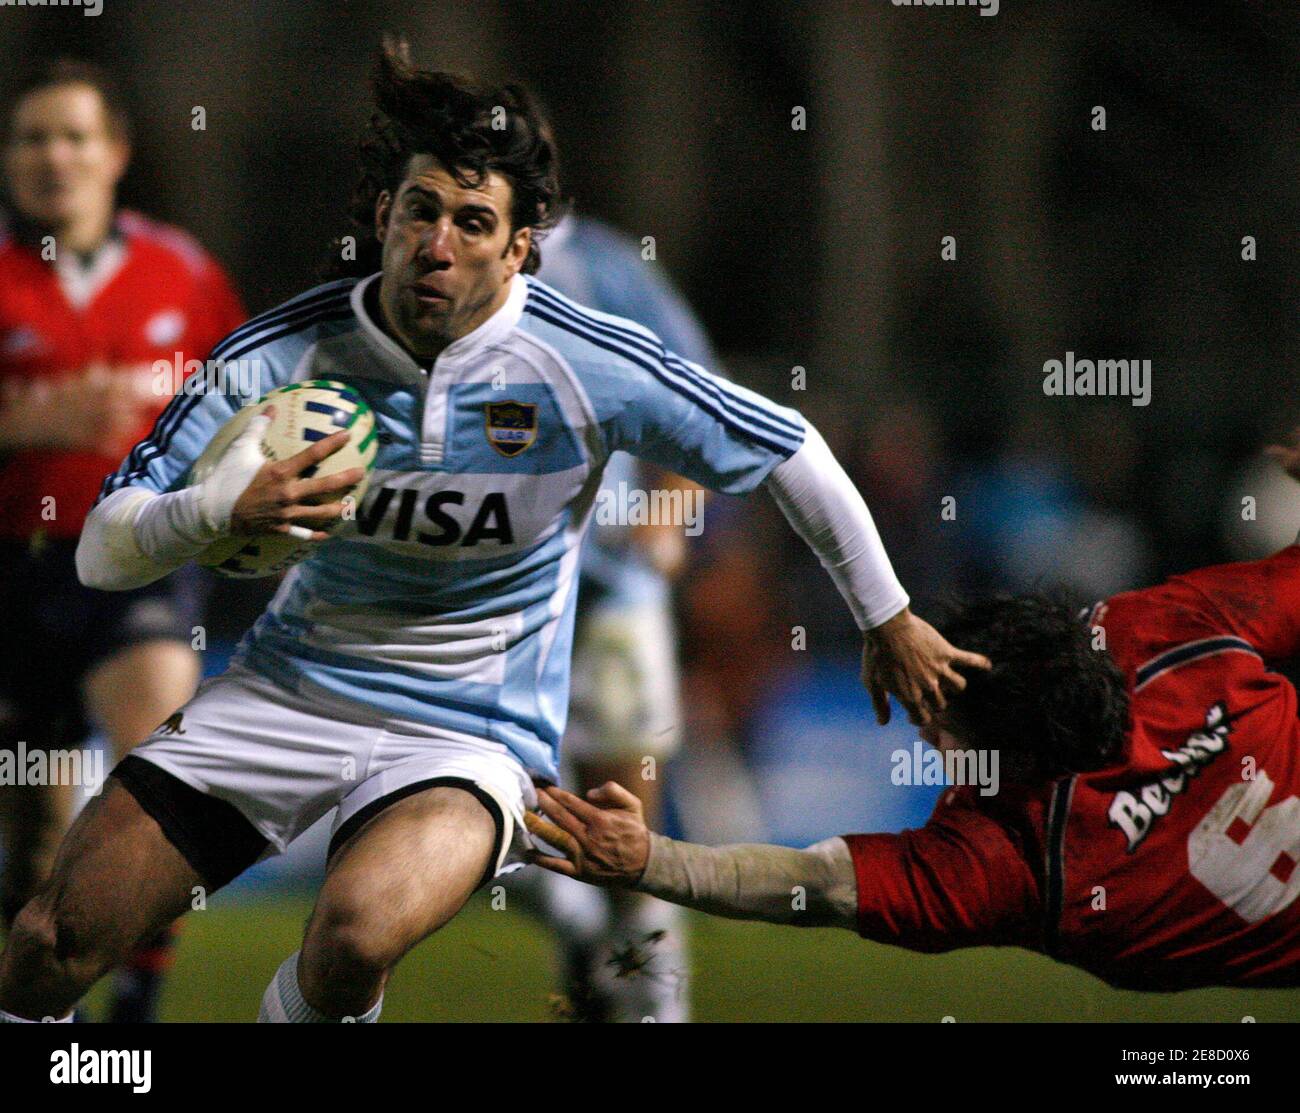 Ignacio Corleto (L) of Argentina's Los Pumas eludes Chile's Andres Palacios  during their friendly rugby match played in Buenos Aires, August 4, 2007.  Argentina will debut in the Rugby World Cup against